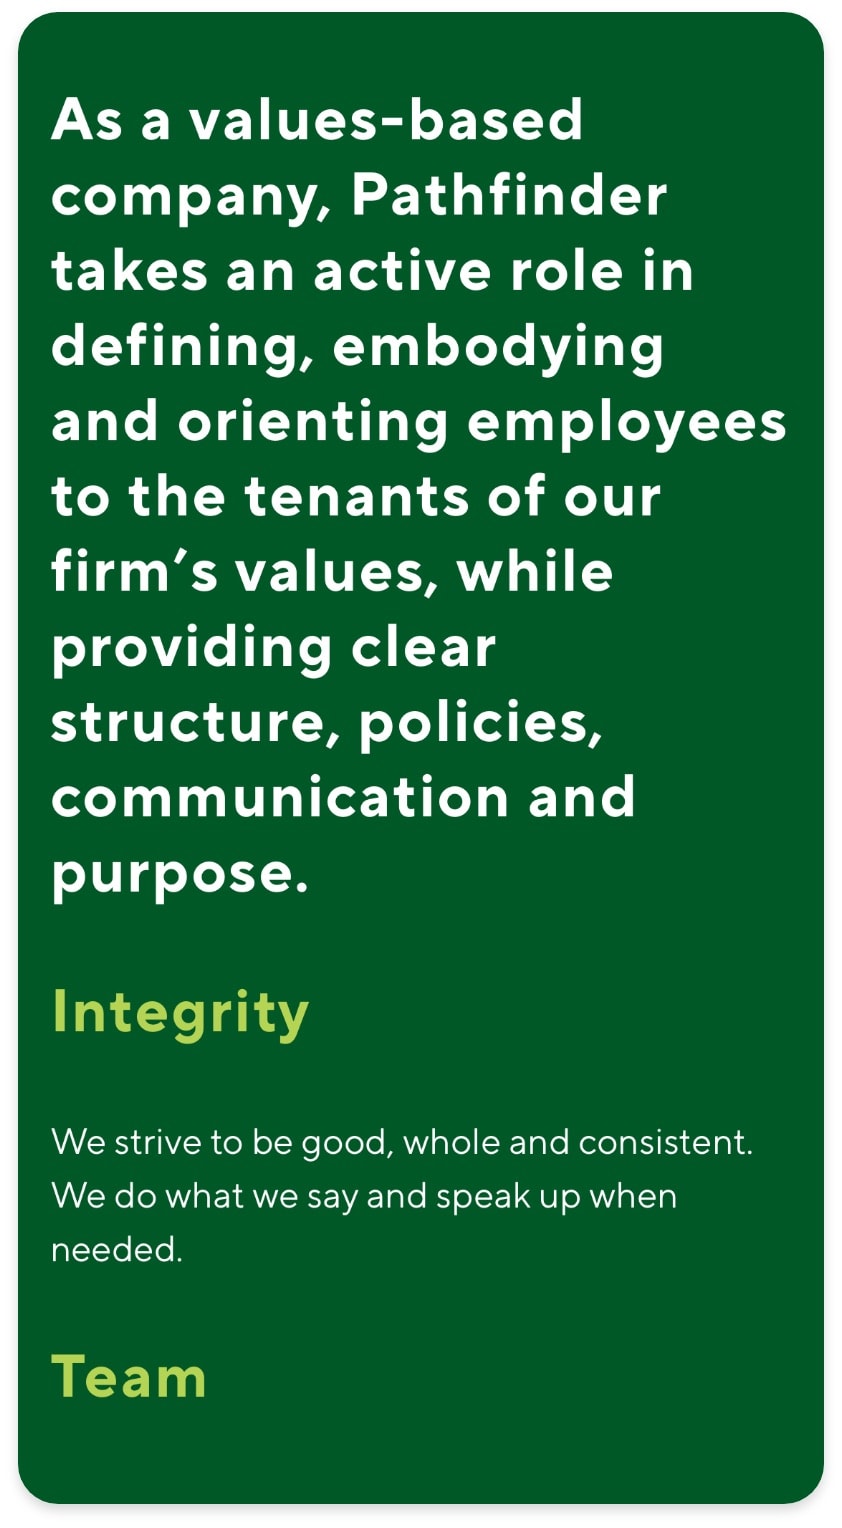 shot of the pathfinder website with a green background and white text that speaks to the company values and team details